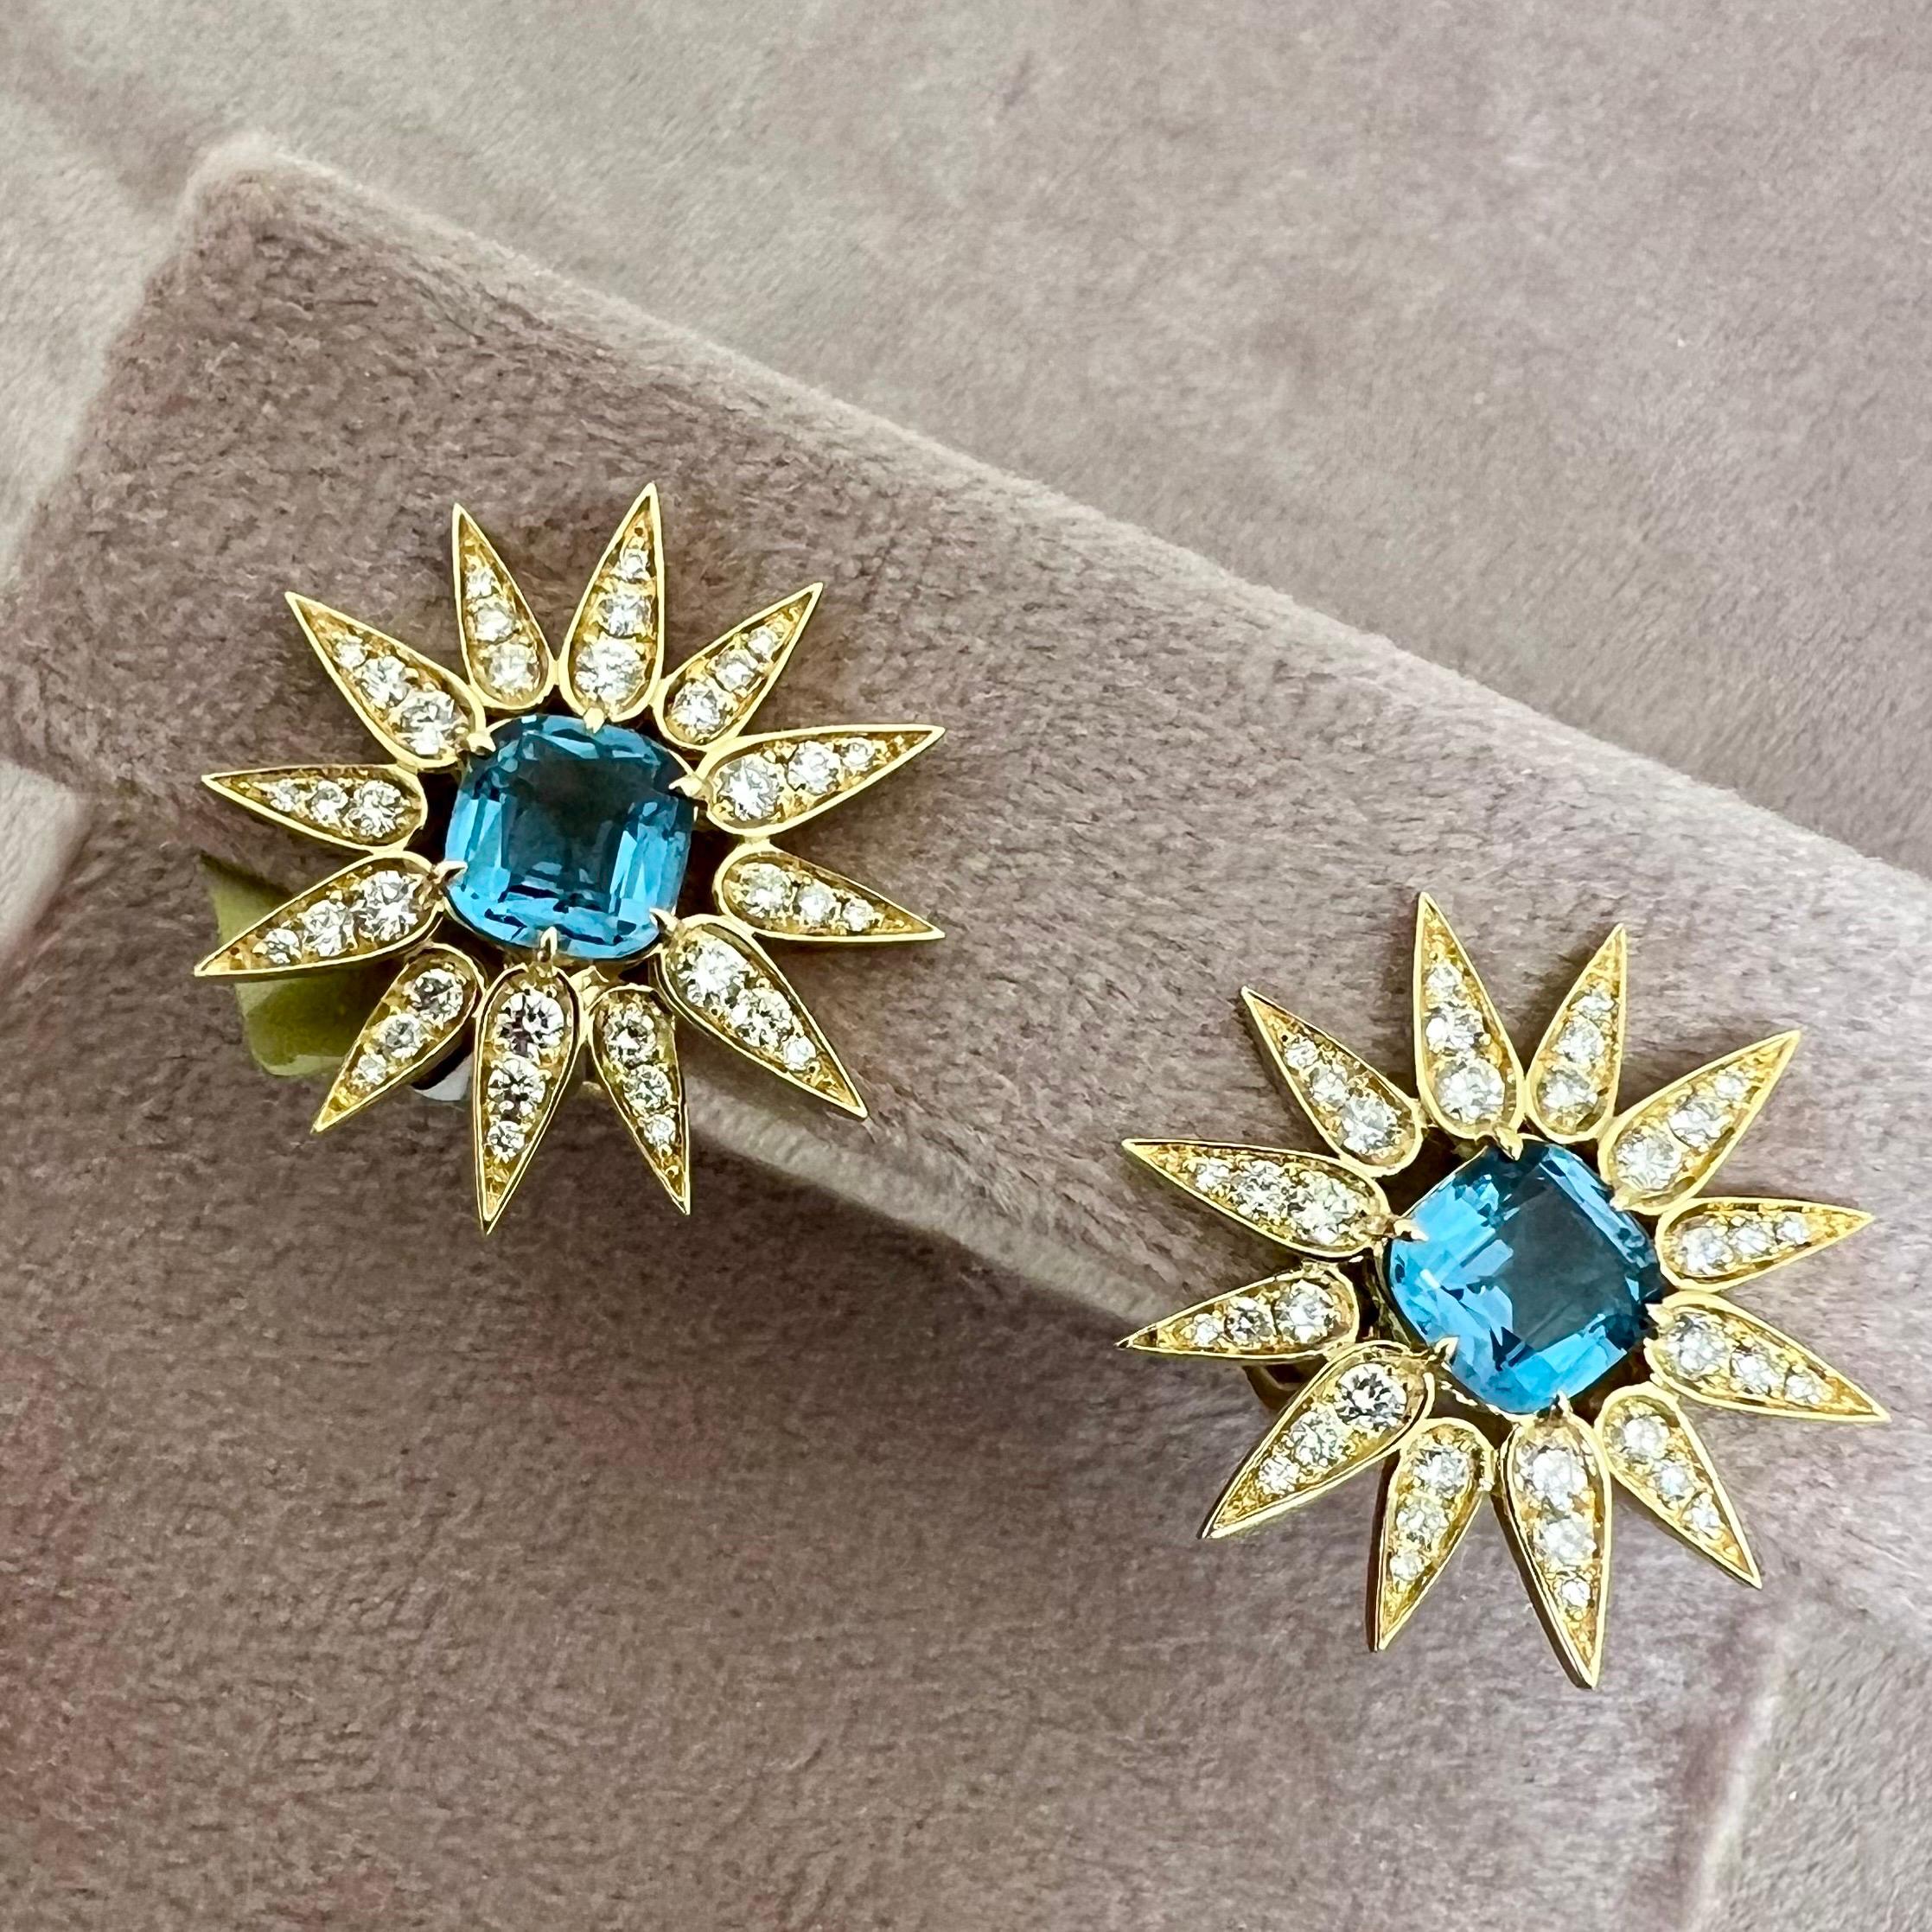 Created in 18 karat yellow gold
Blue Topaz 3.50 carats approx.
Diamonds 1.0 carat approx.
Omega clip-backs & posts
Limited Edition

Forged from 18 karat yellow gold, these limited edition earrings feature an approximate 3.5 carat Blue Topaz and 1.0